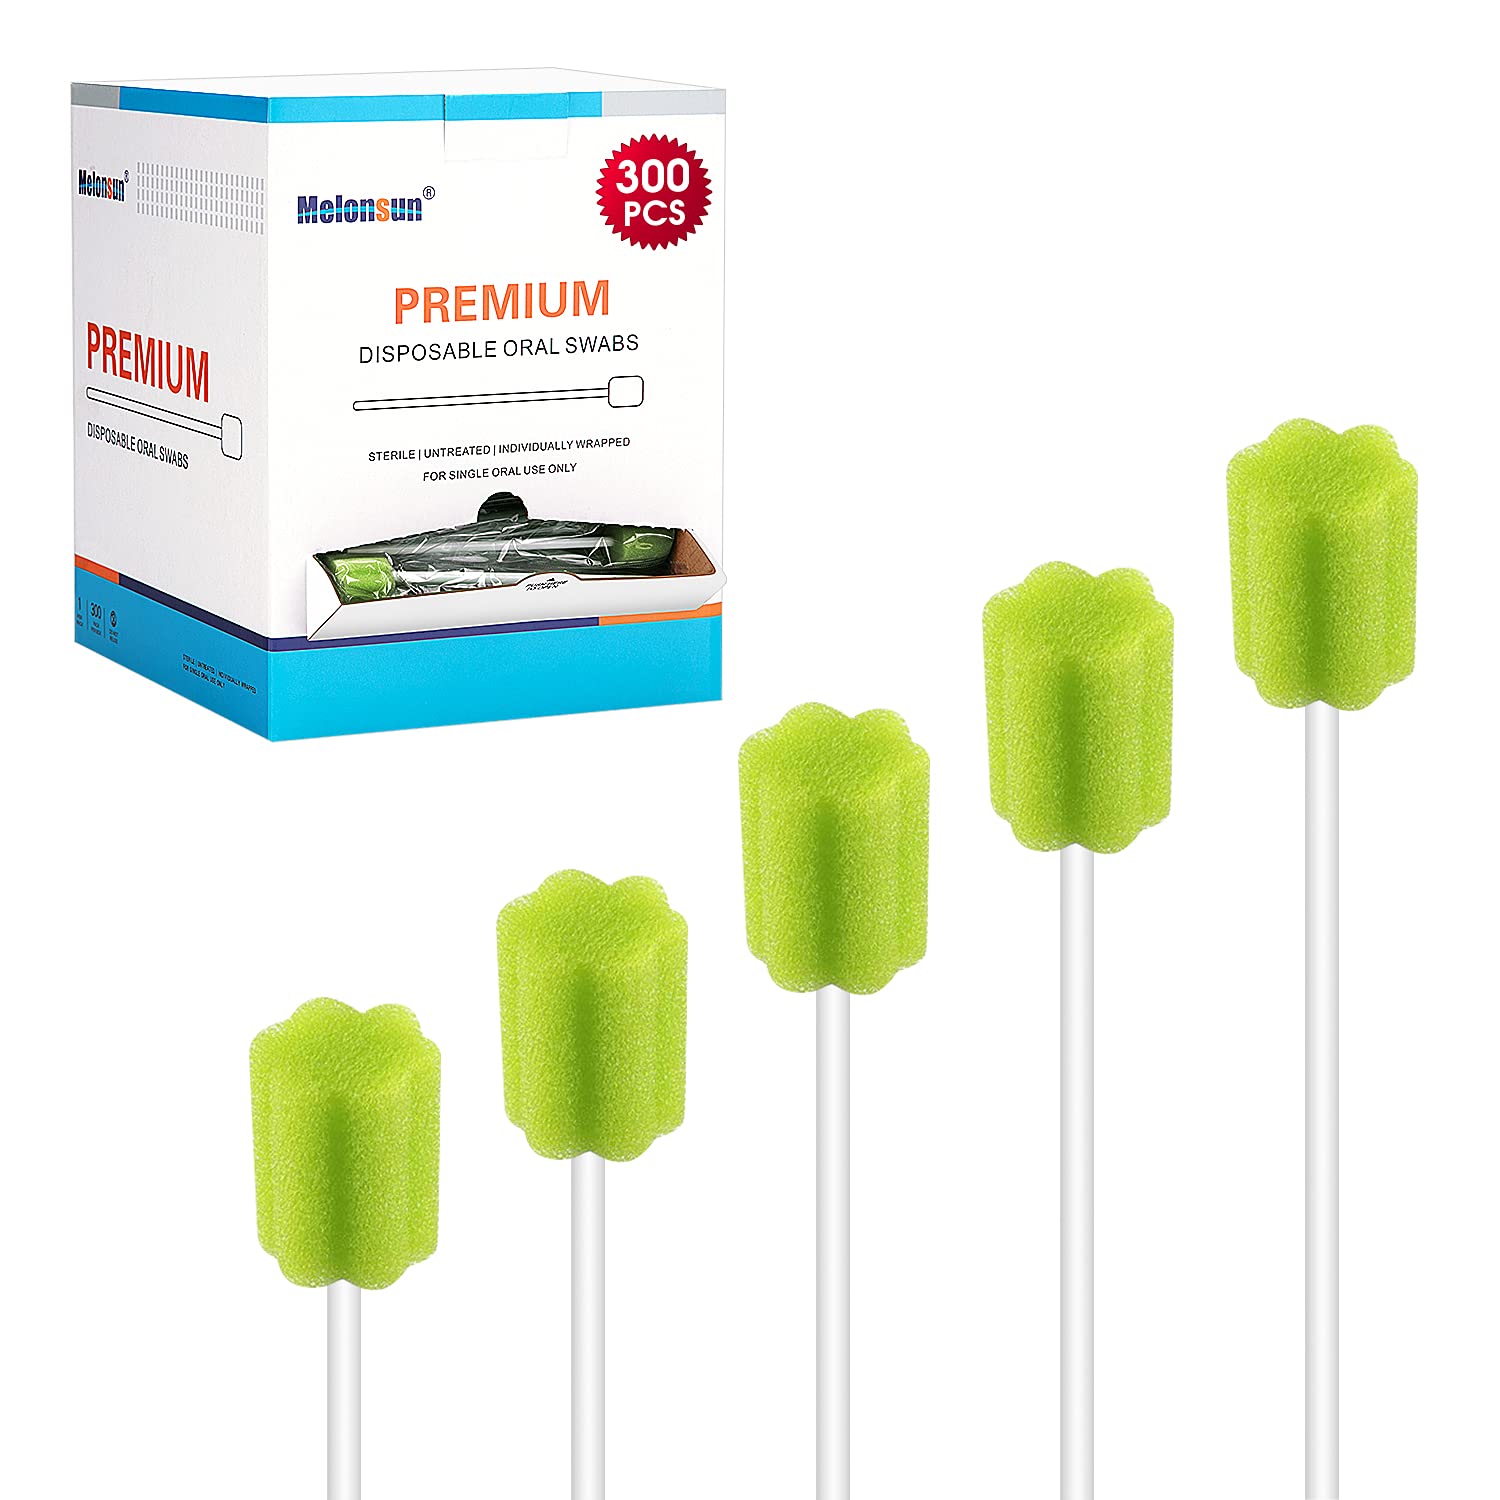 300 Pcs Oral Swabs-Unflavored & Sterile Disposable Dental Swabsticks for Mouth Cleaning- Individually Wrapped (Green)